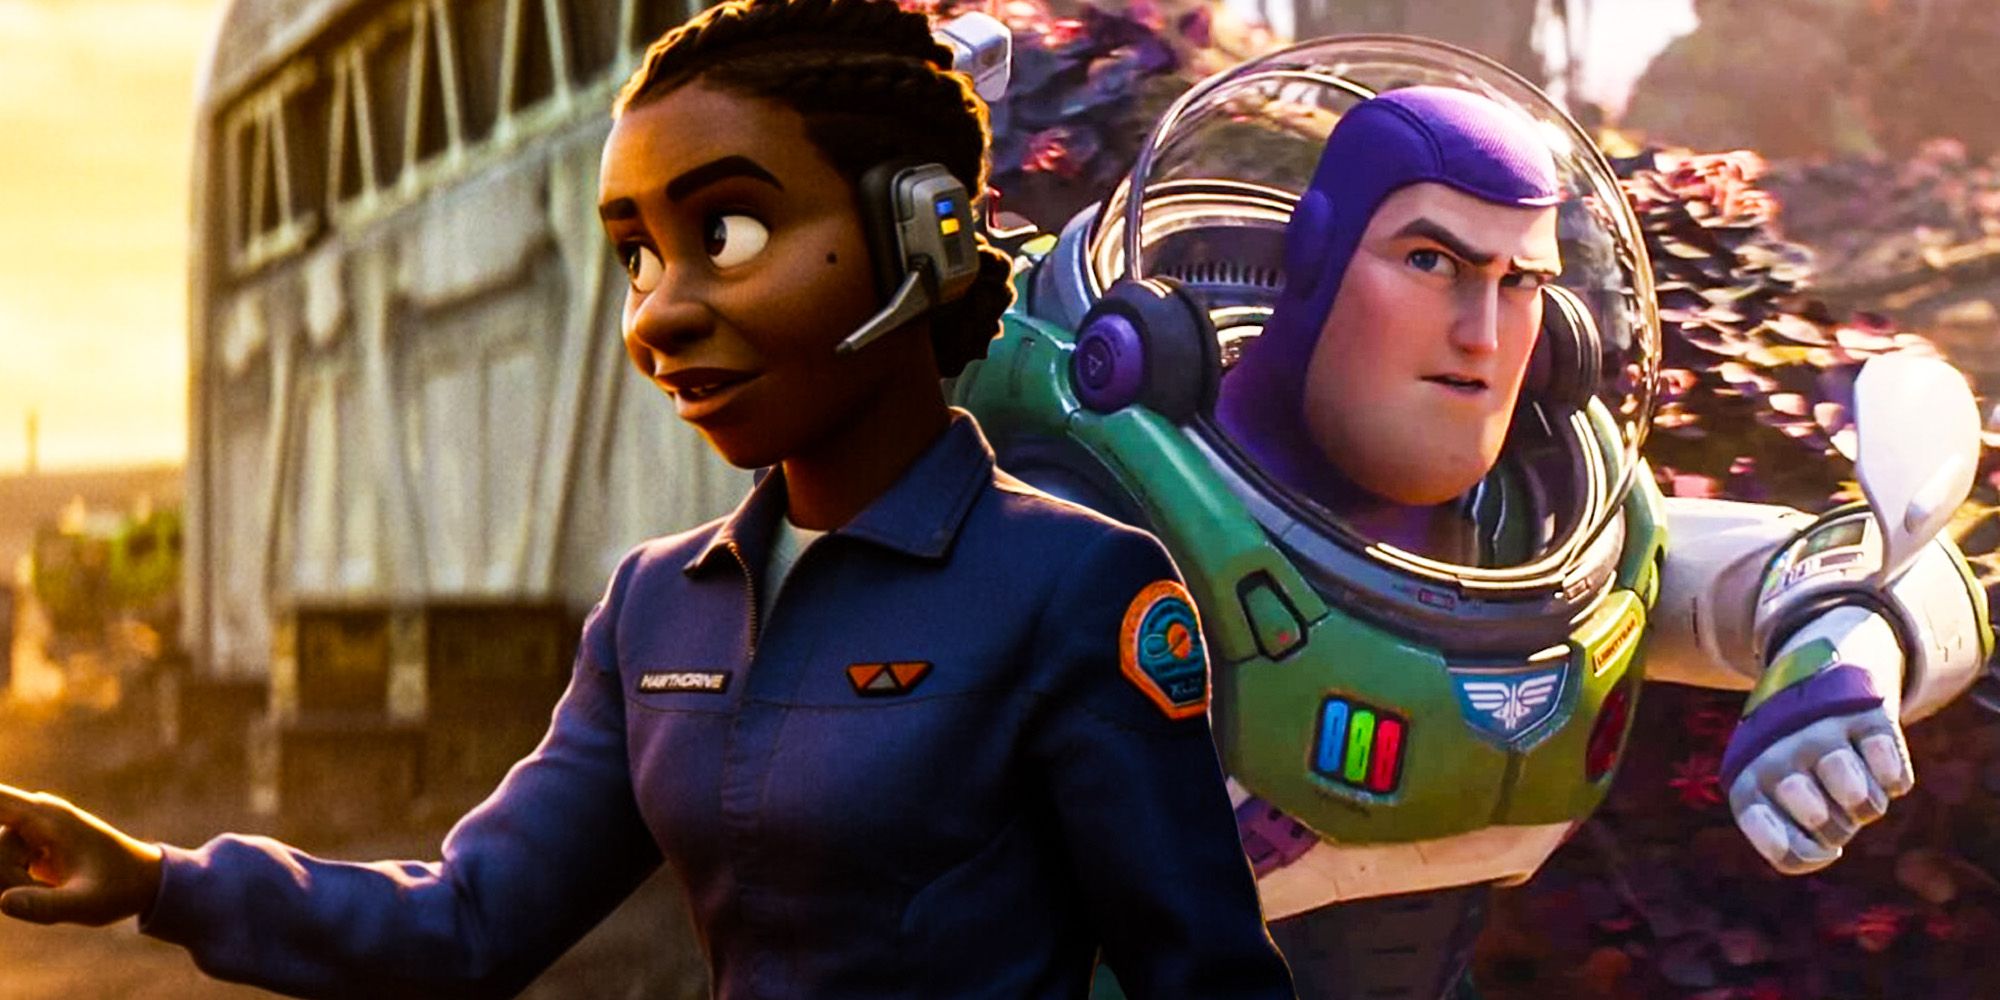 Why Lightyear reviews are so mixed